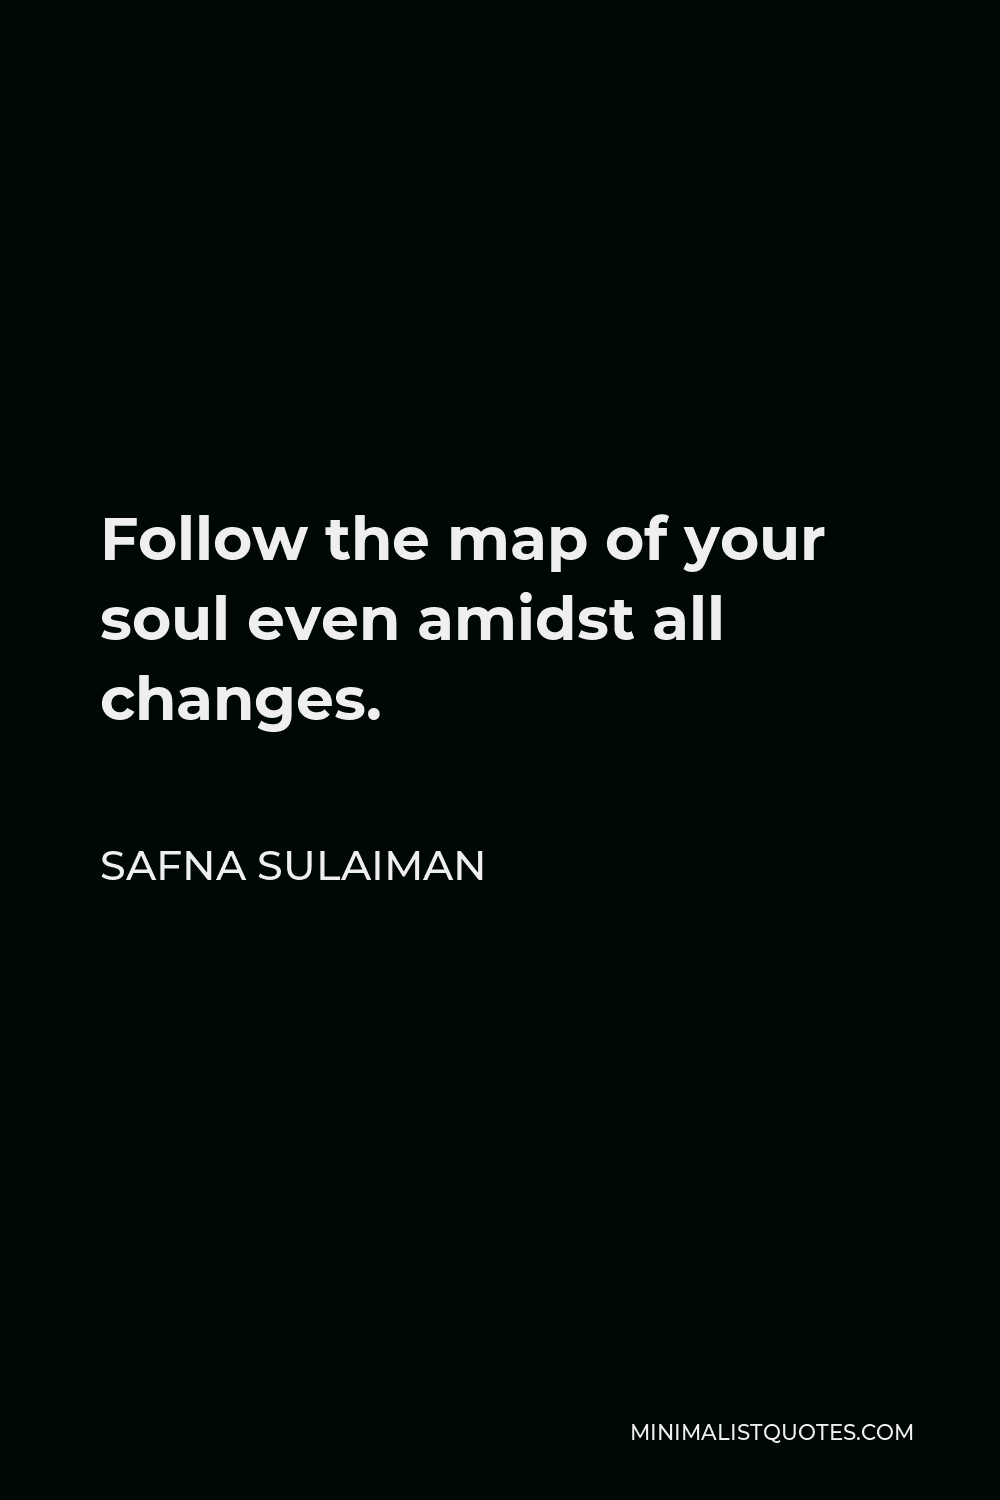 Safna Sulaiman Quote - Follow the map of your soul even amidst all changes.